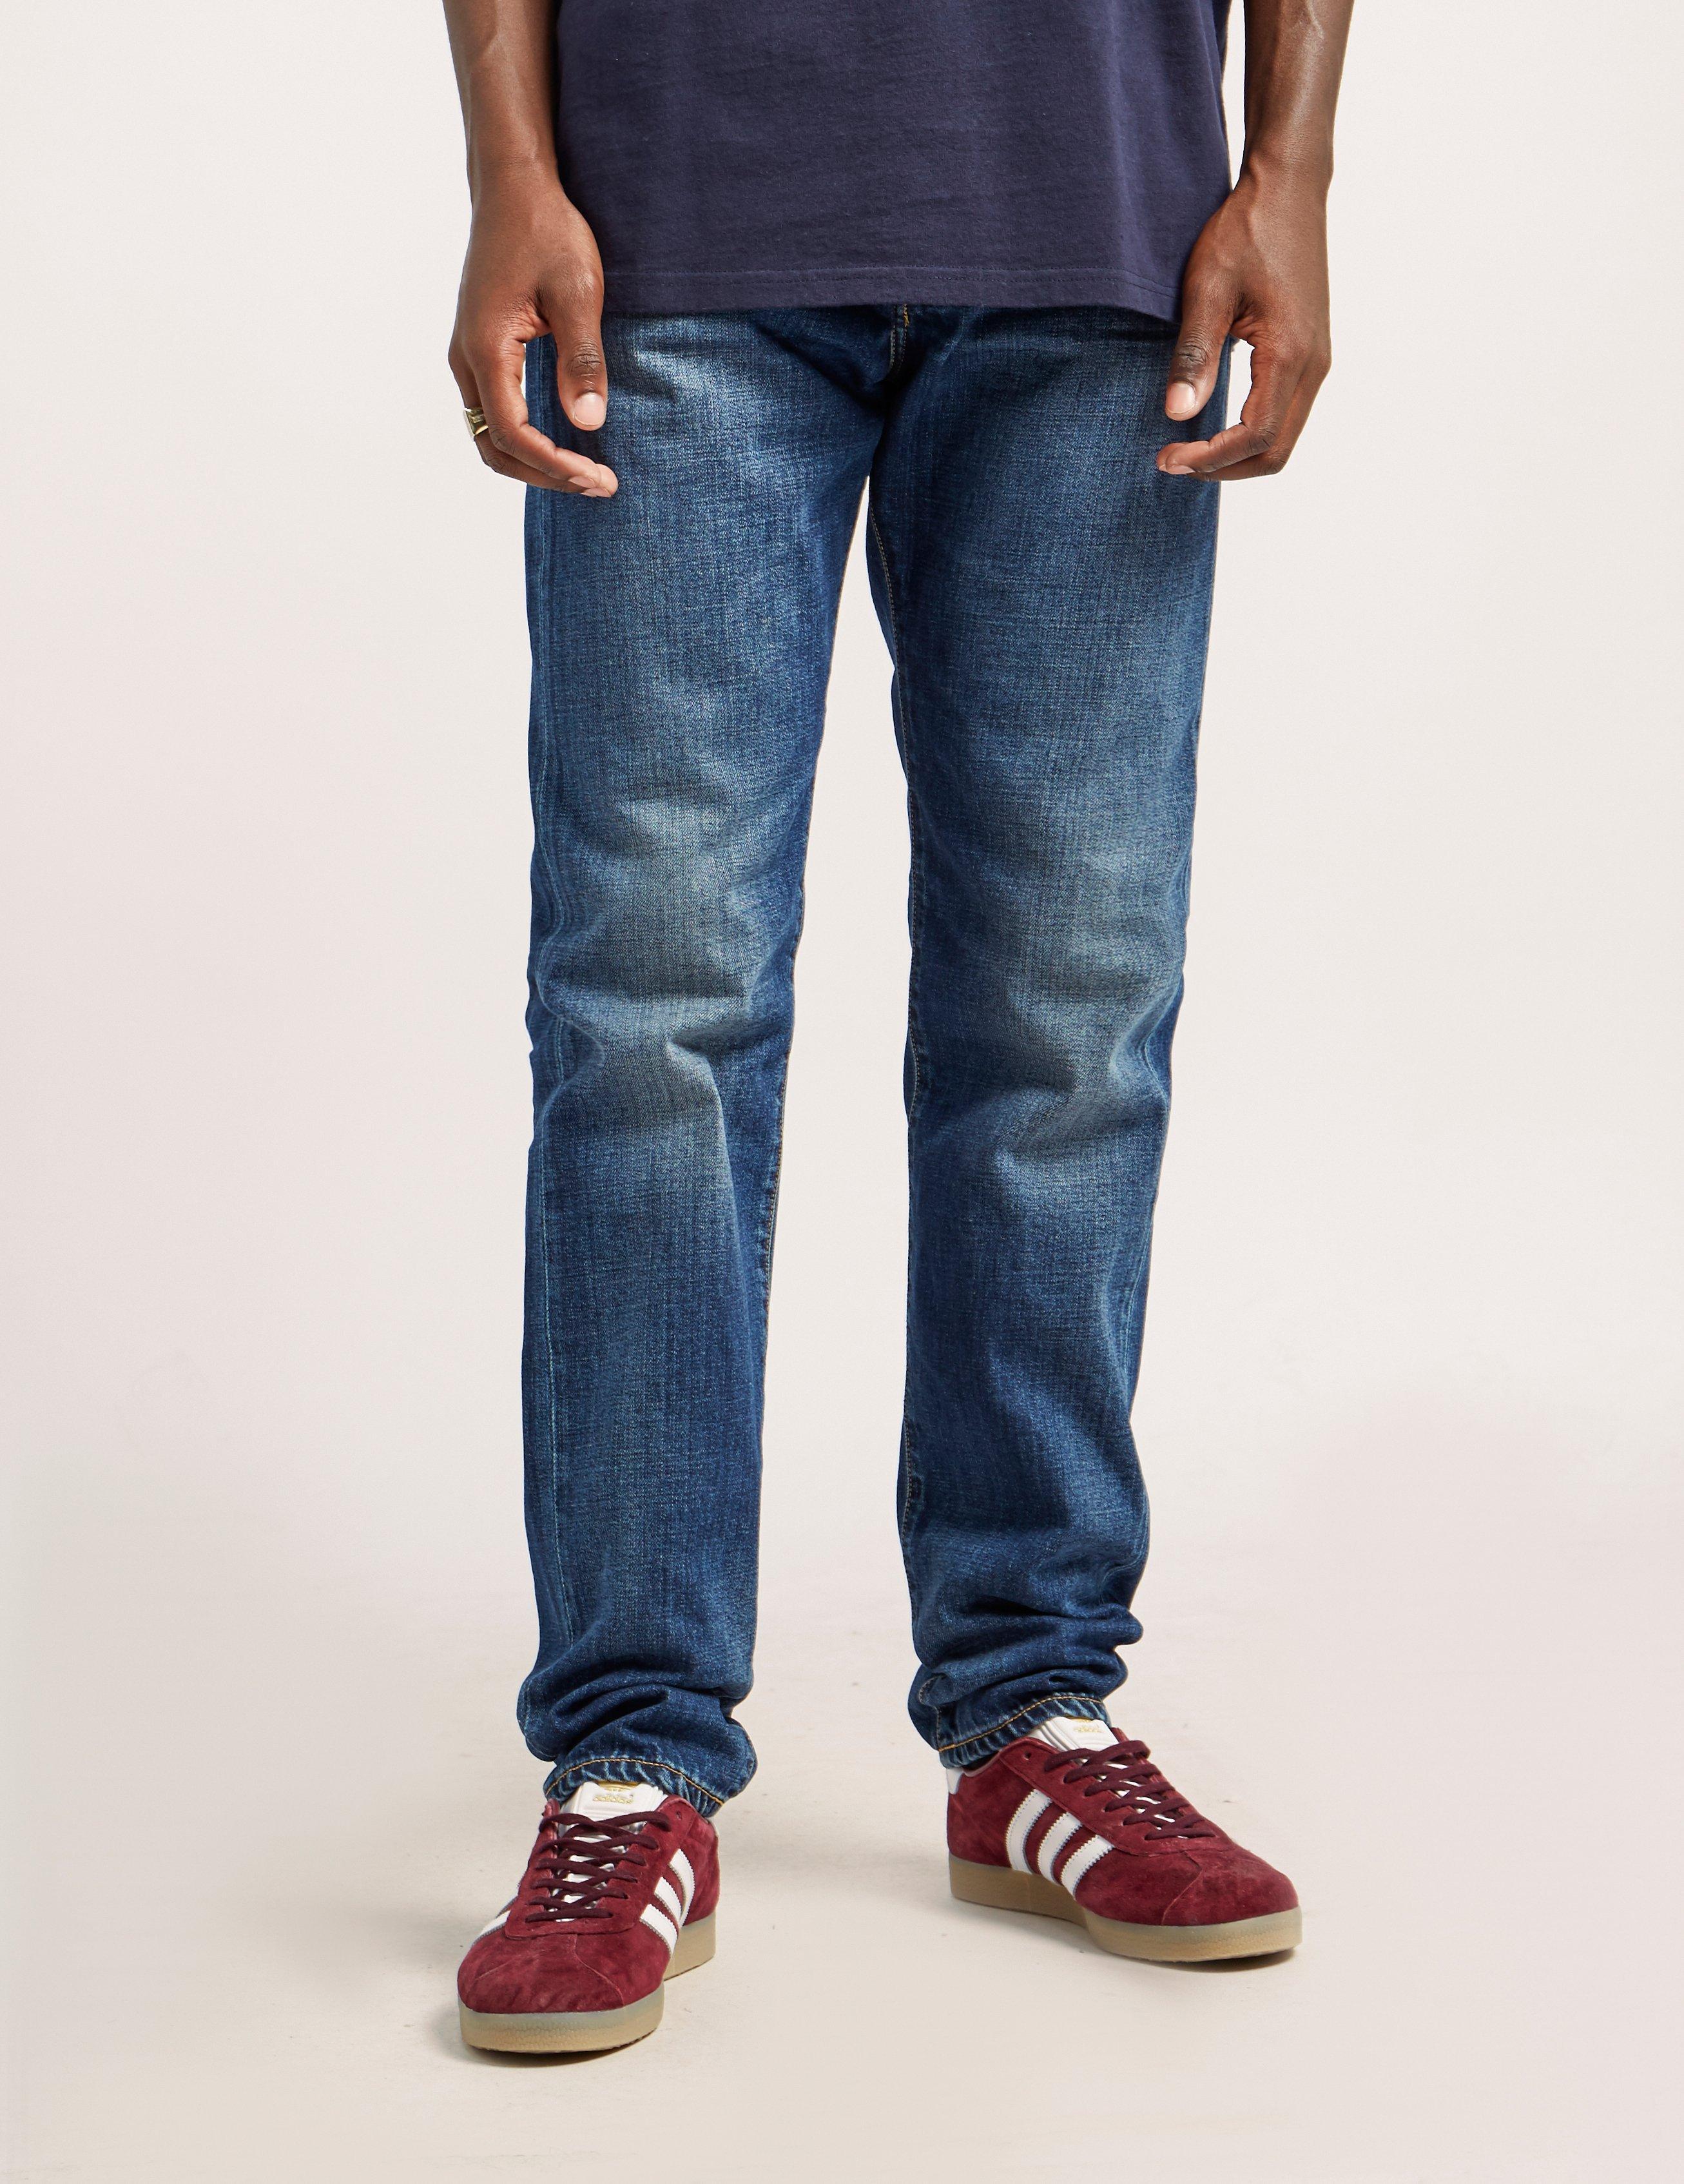 Lyst - Edwin Ed80 Slim Tapered Stretch Jeans in Blue for Men